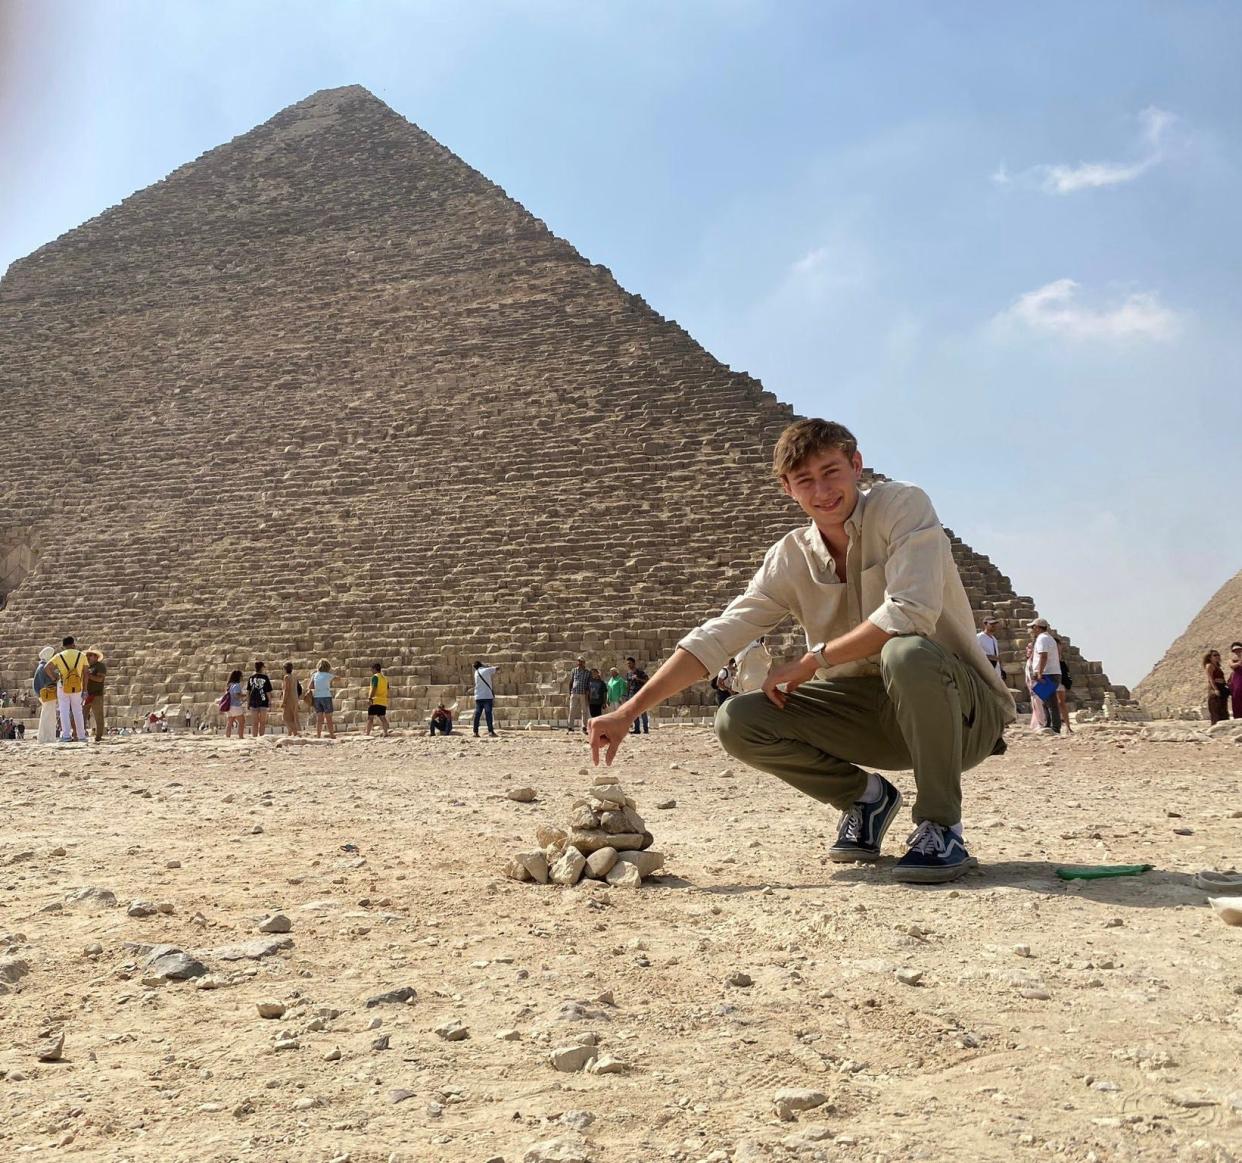 Benjamin Murray at the pyramids in Egypt while studying at the American University of Cairo.